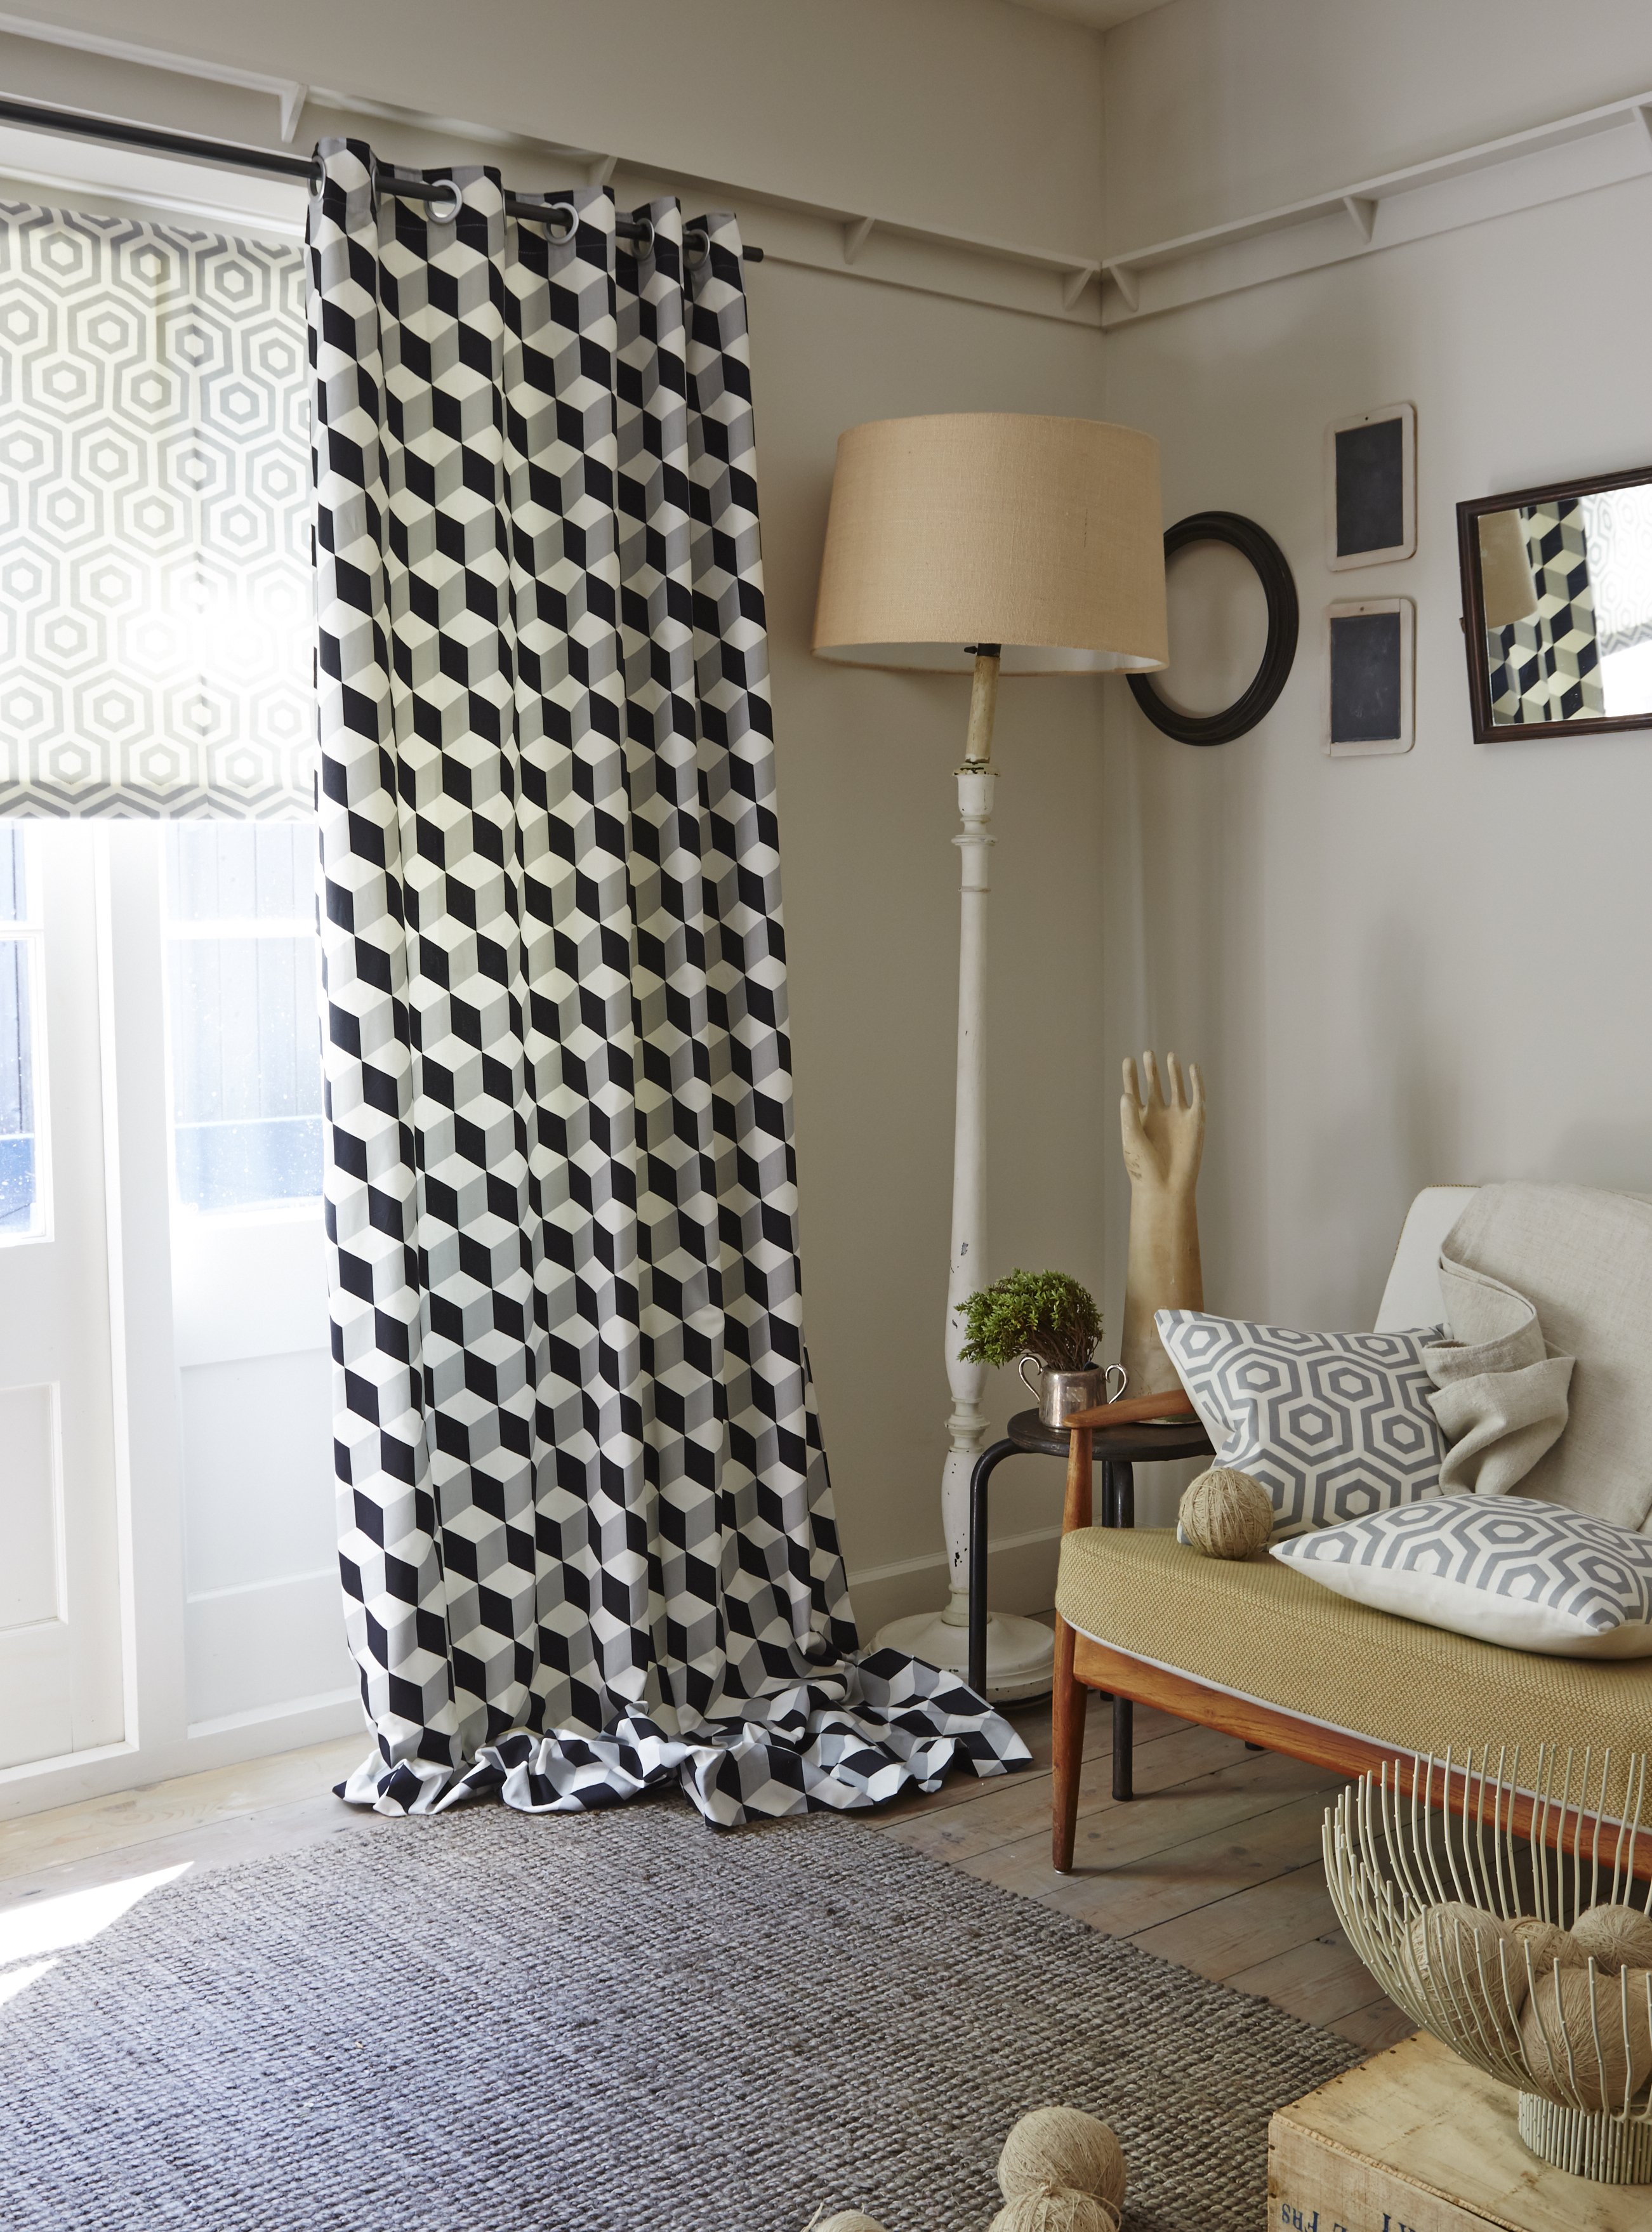 Geometric soft furnishings teamed with neutral furniture